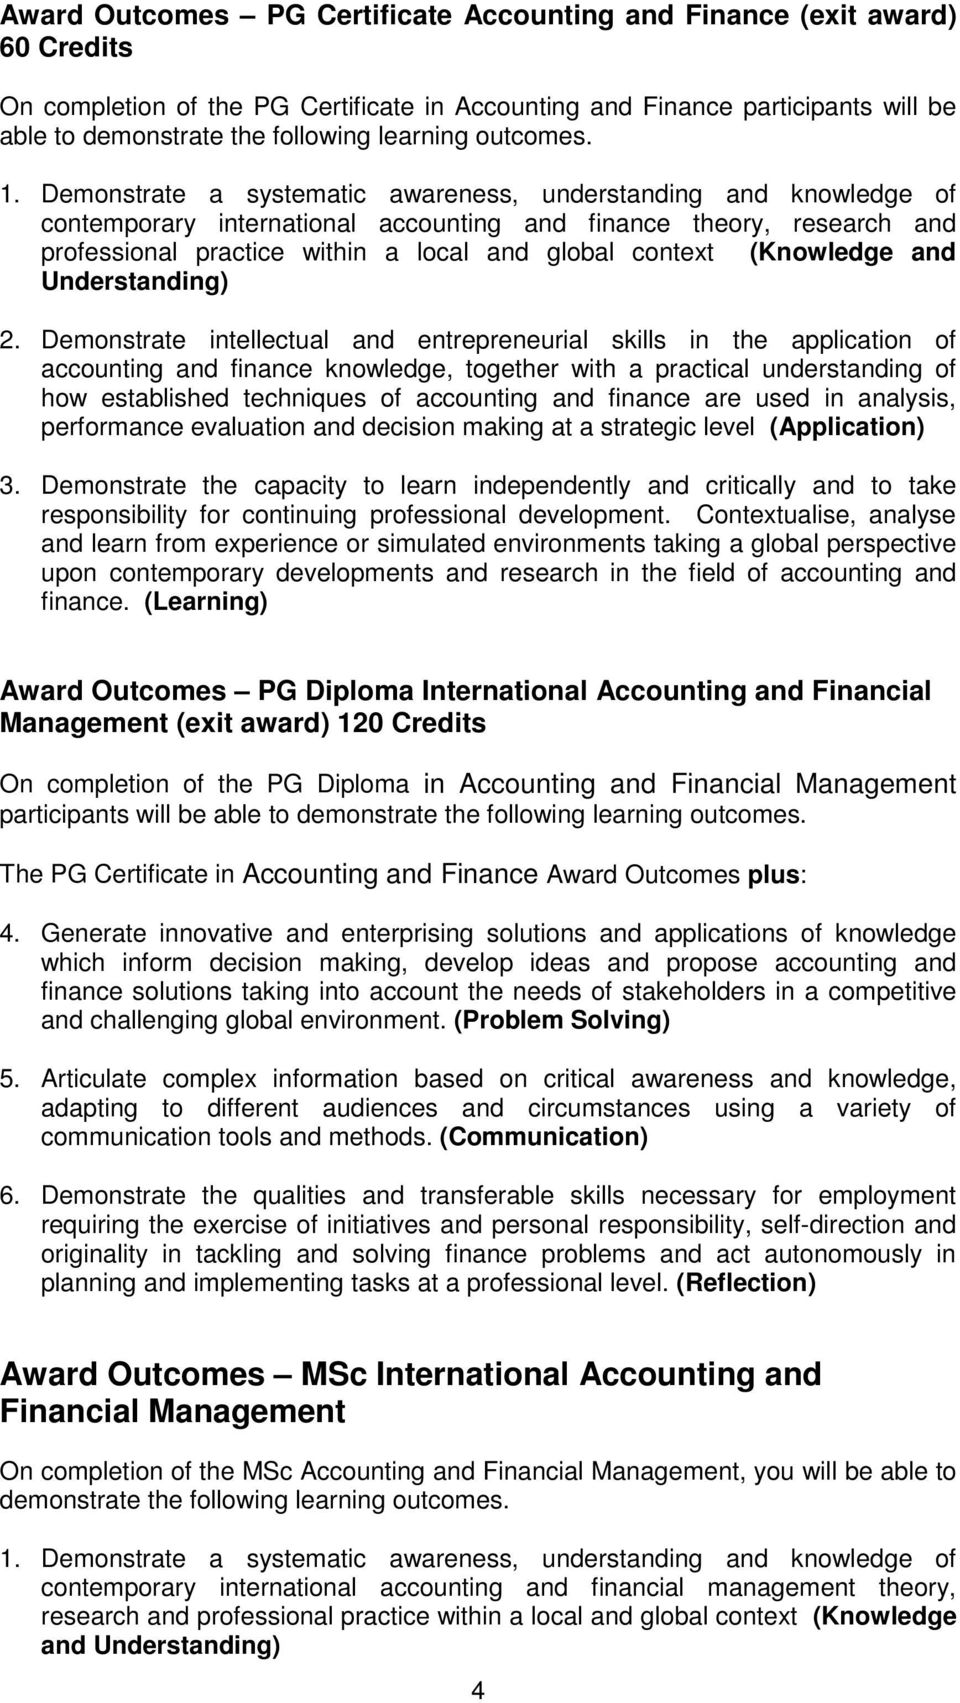 Demonstrate a systematic awareness, understanding and knowledge of contemporary international accounting and finance theory, research and professional practice within a local and global context